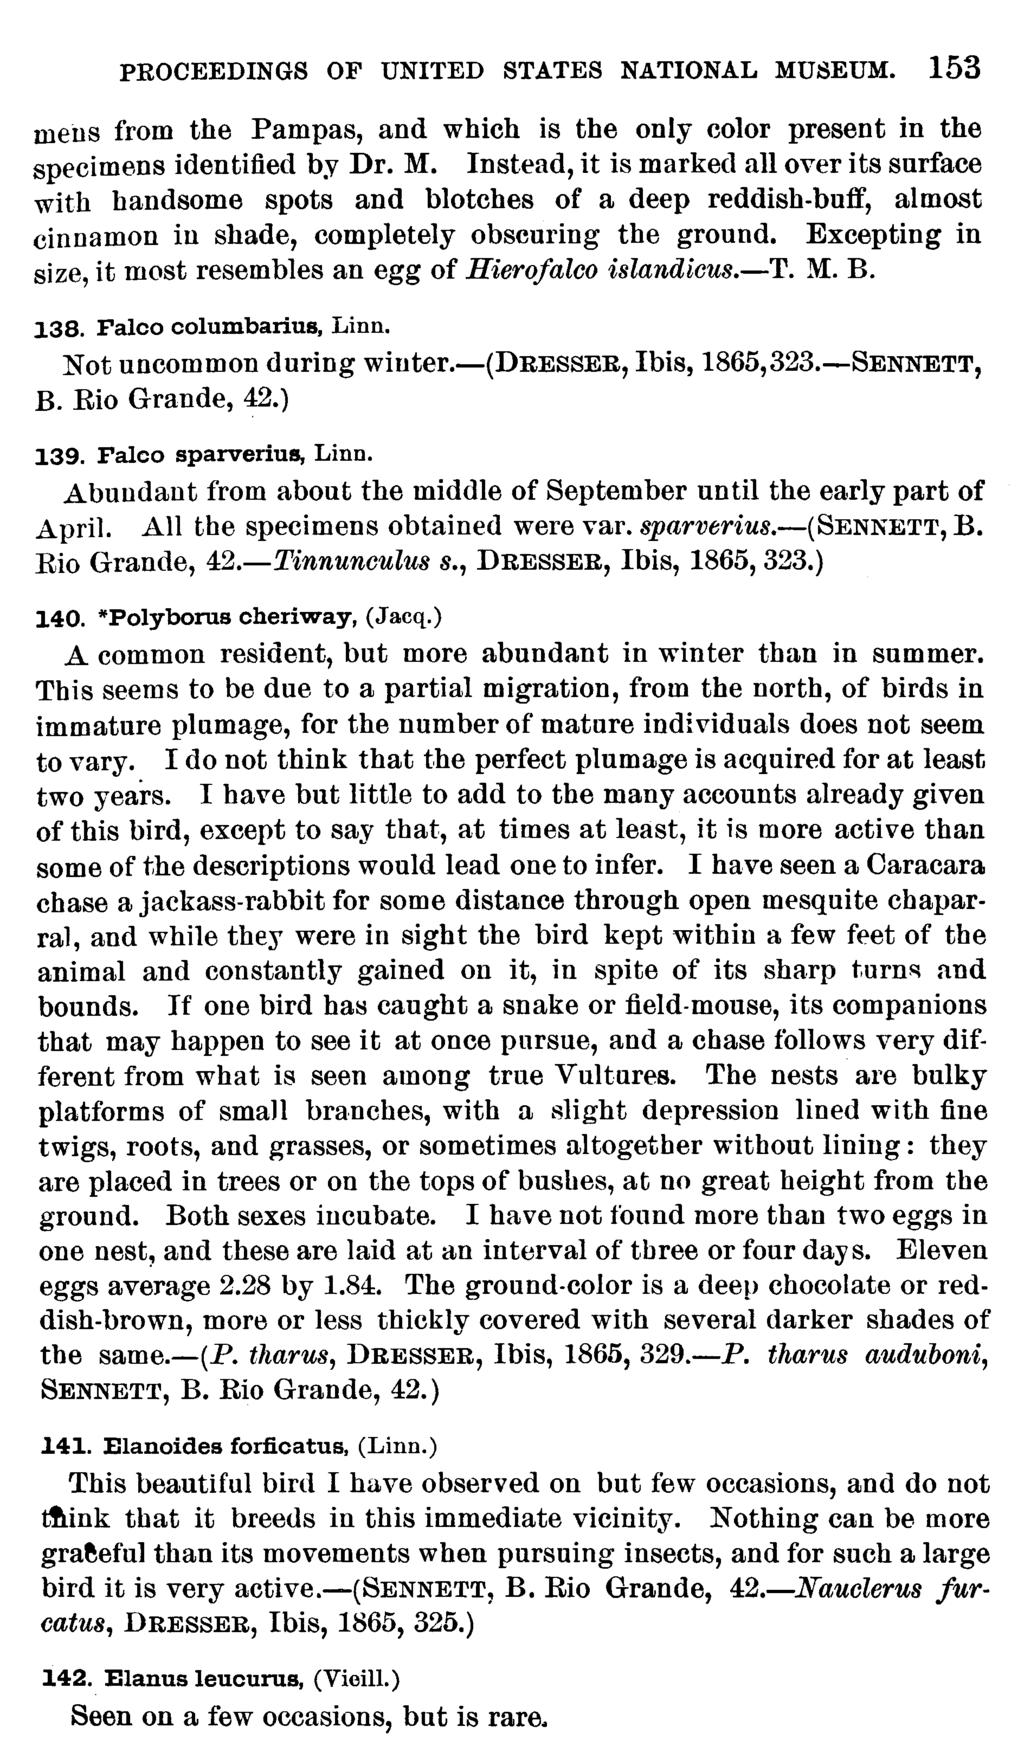 PROCEEDINGS OF UNITED STATES NATIONAL MUSEUM. 153 mens from the Pampas, and which is the only color present in the specimens identified by Dr. M. Instead, it is marked all over its surface with handsome spots and blotches of a deep reddish-buff, almost cinnamon in shade, completely obscuring the ground.